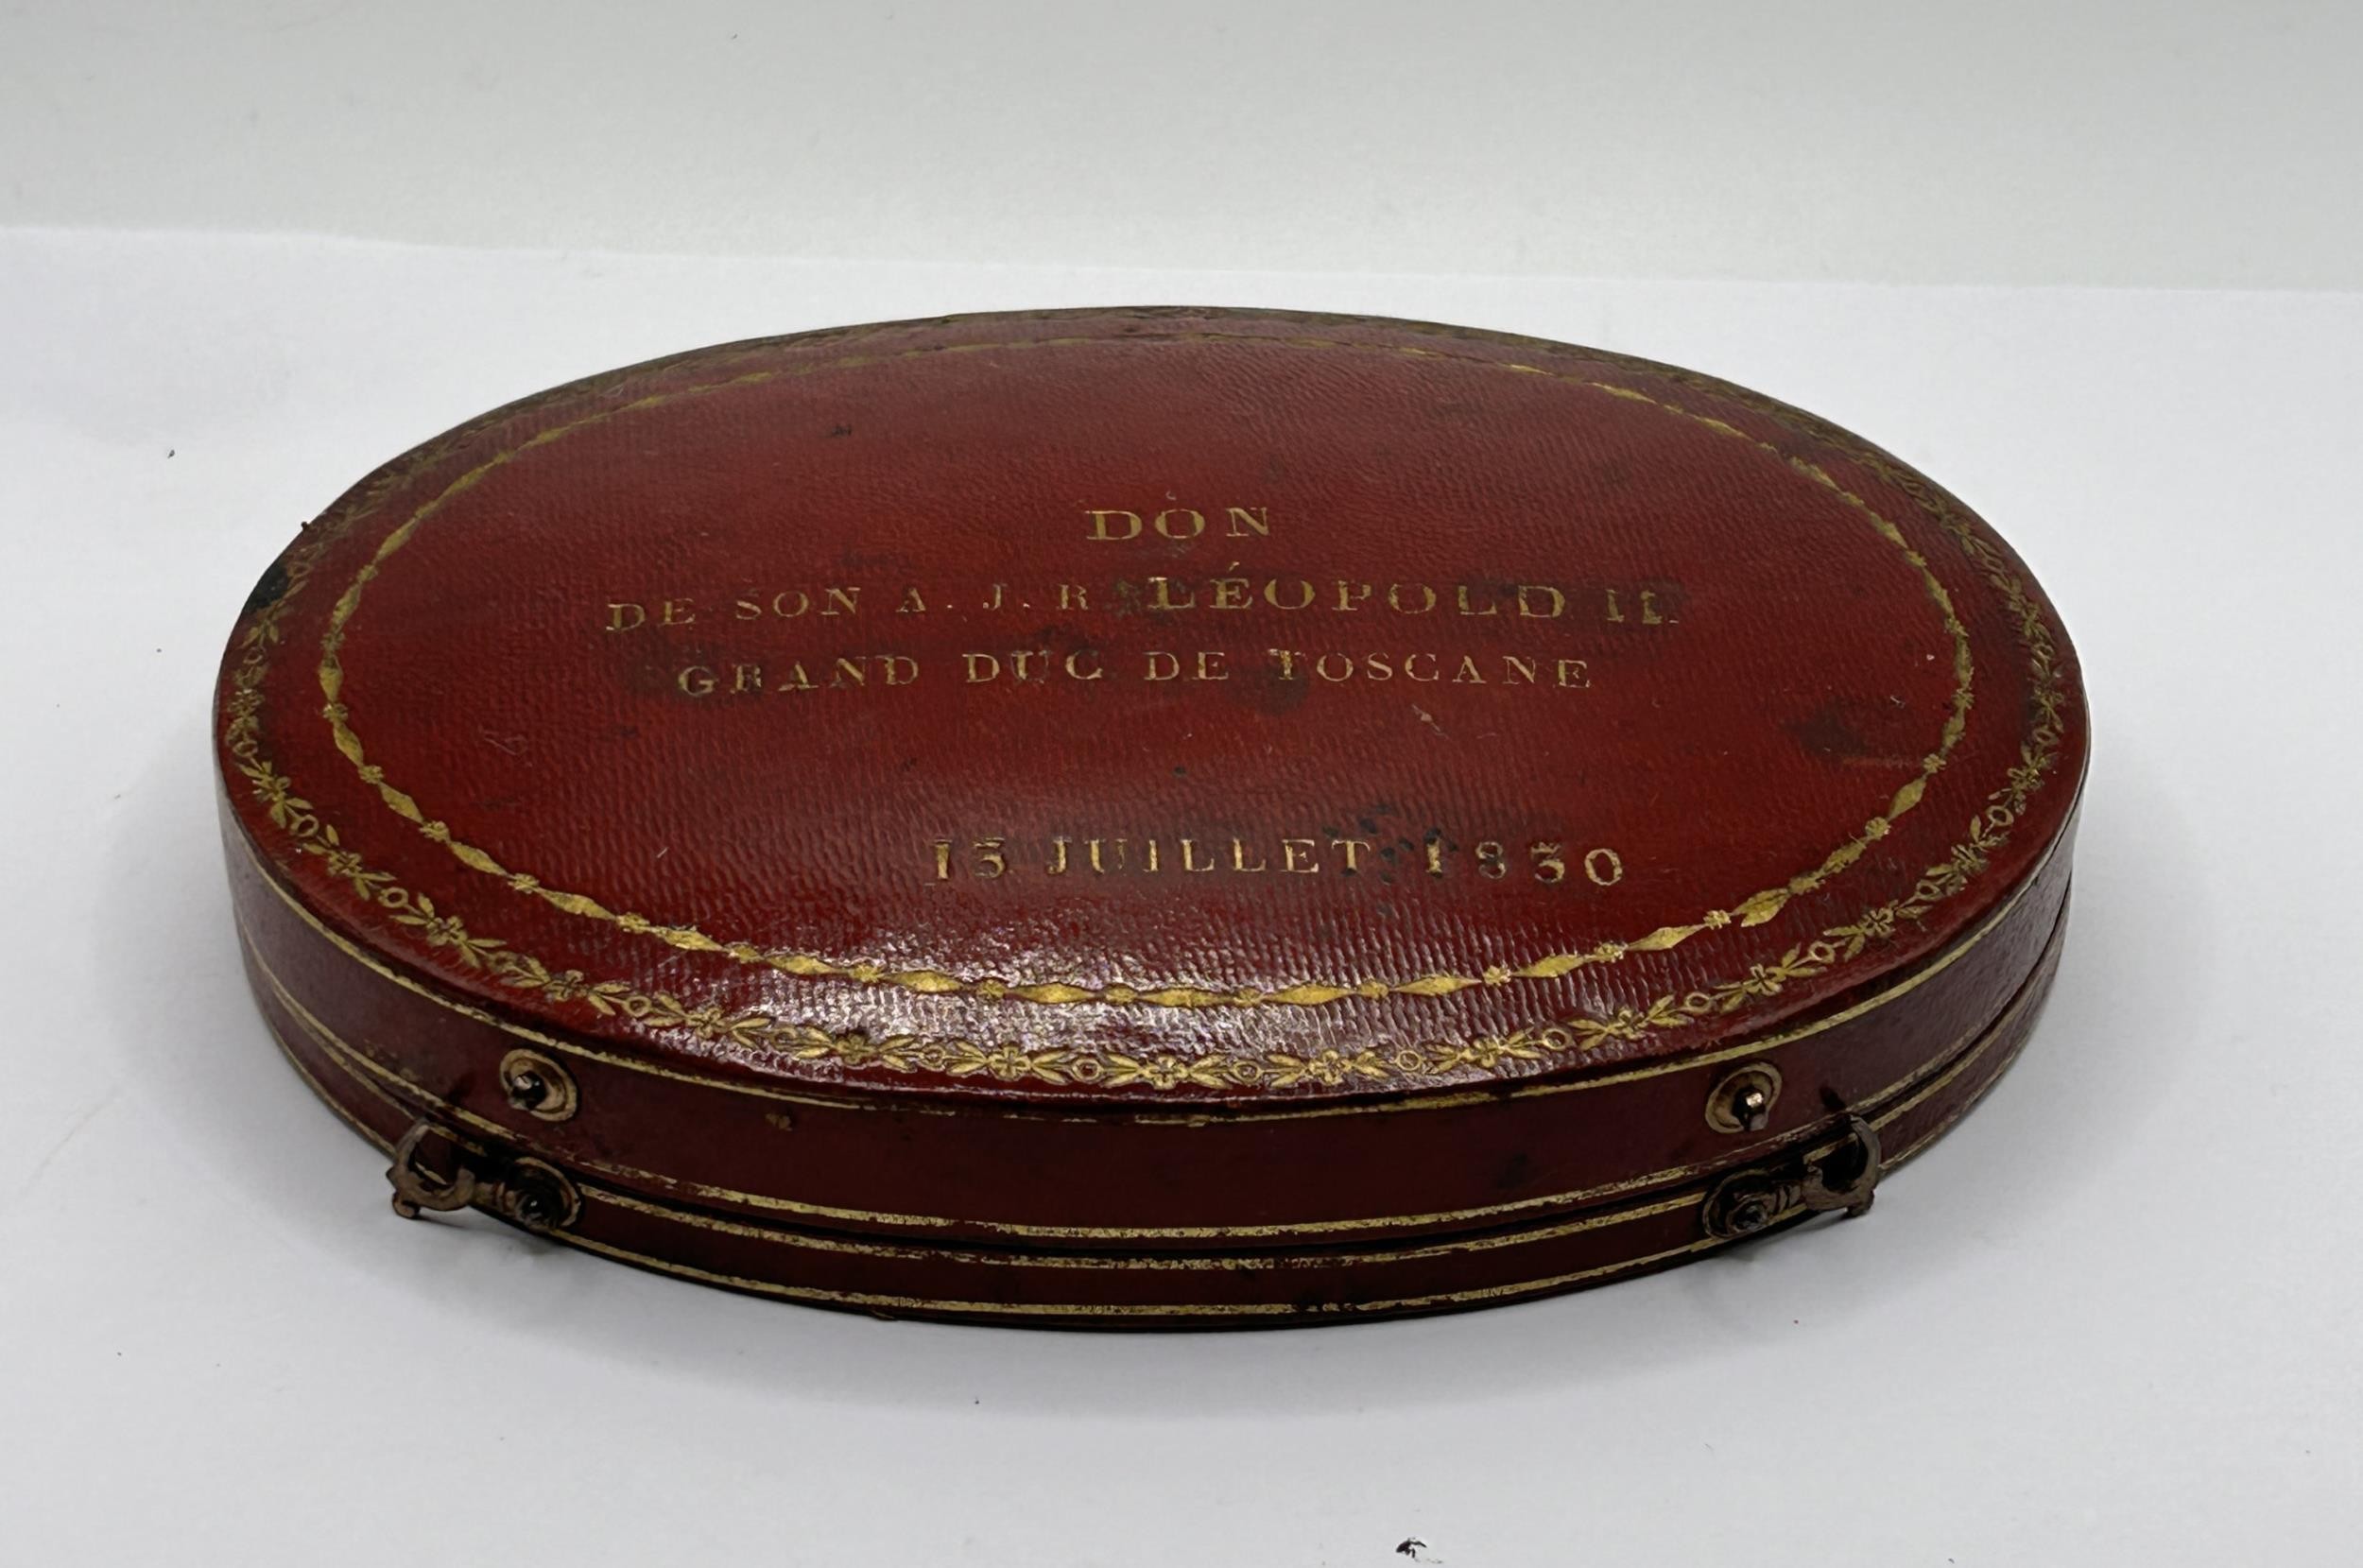 An early/mid 19th century French oval box, to hold two pocket watches, the cover tooled in gilt 'DON - Image 2 of 5